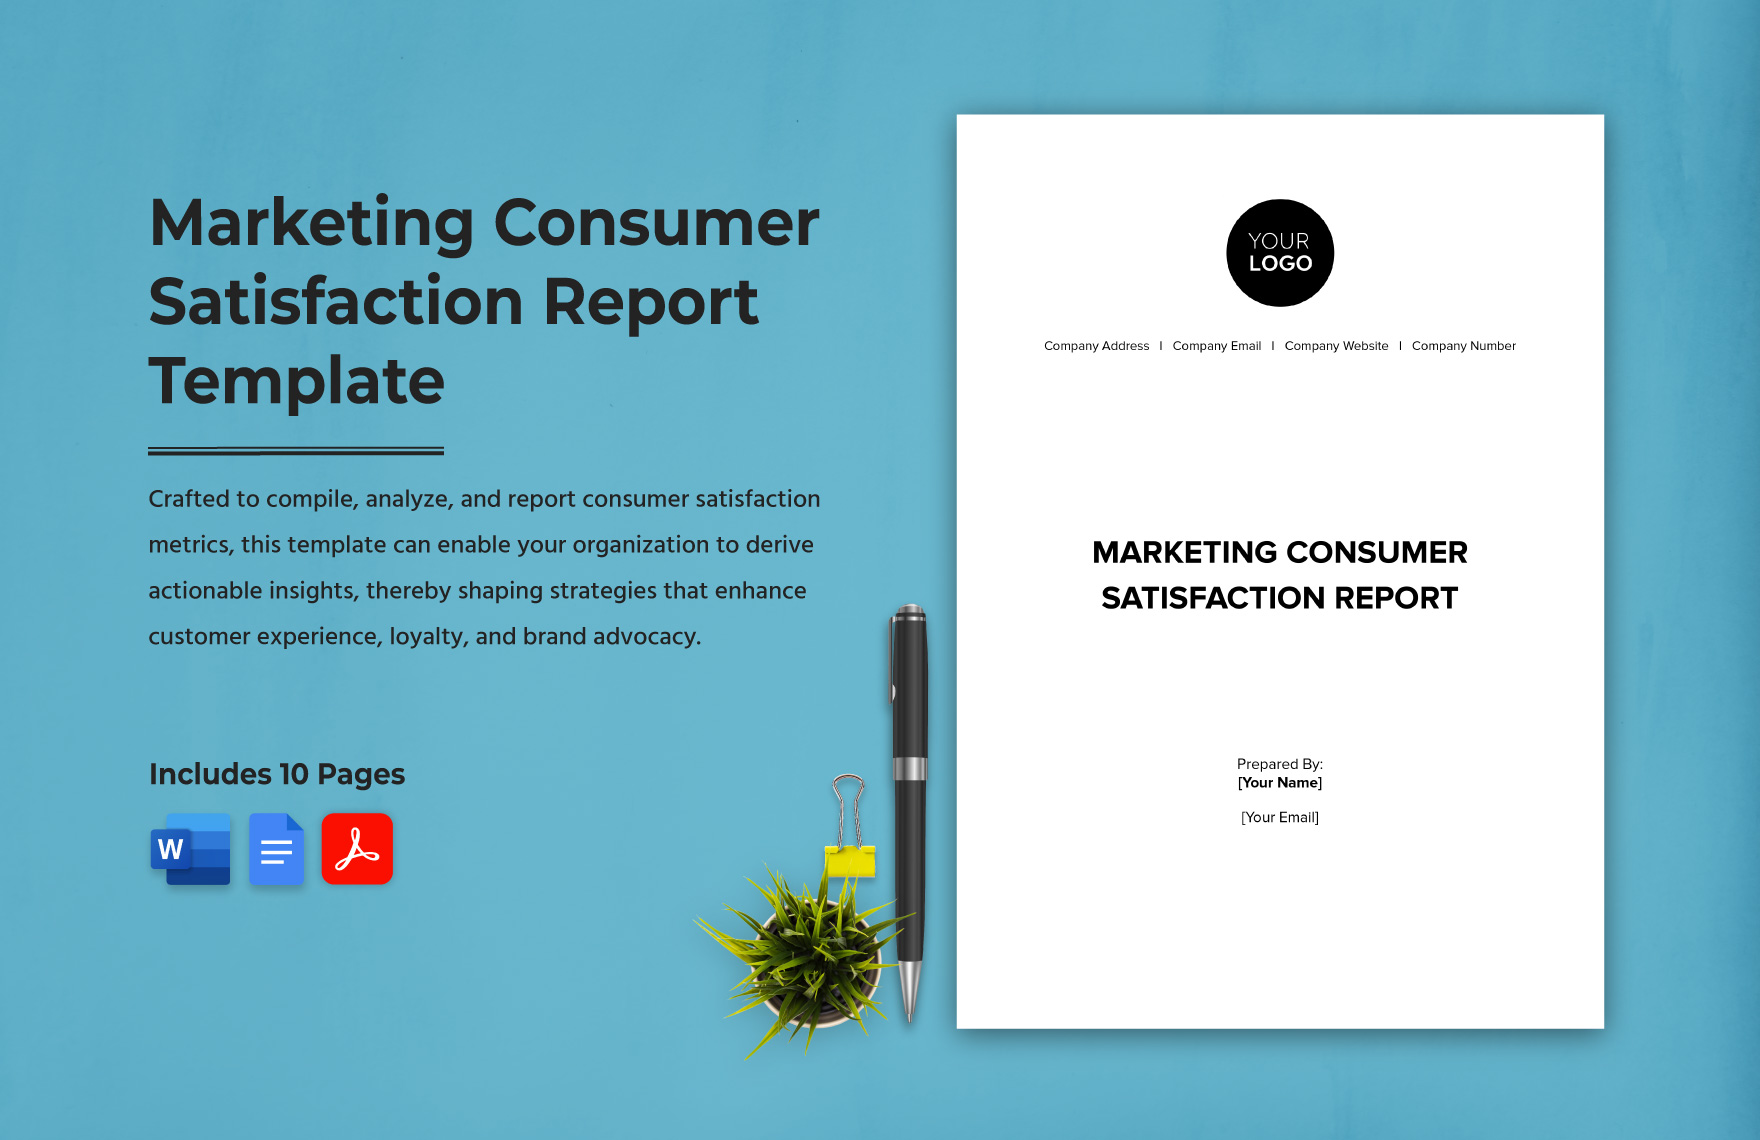 Marketing Consumer Satisfaction Report Template in Word, Google Docs, PDF